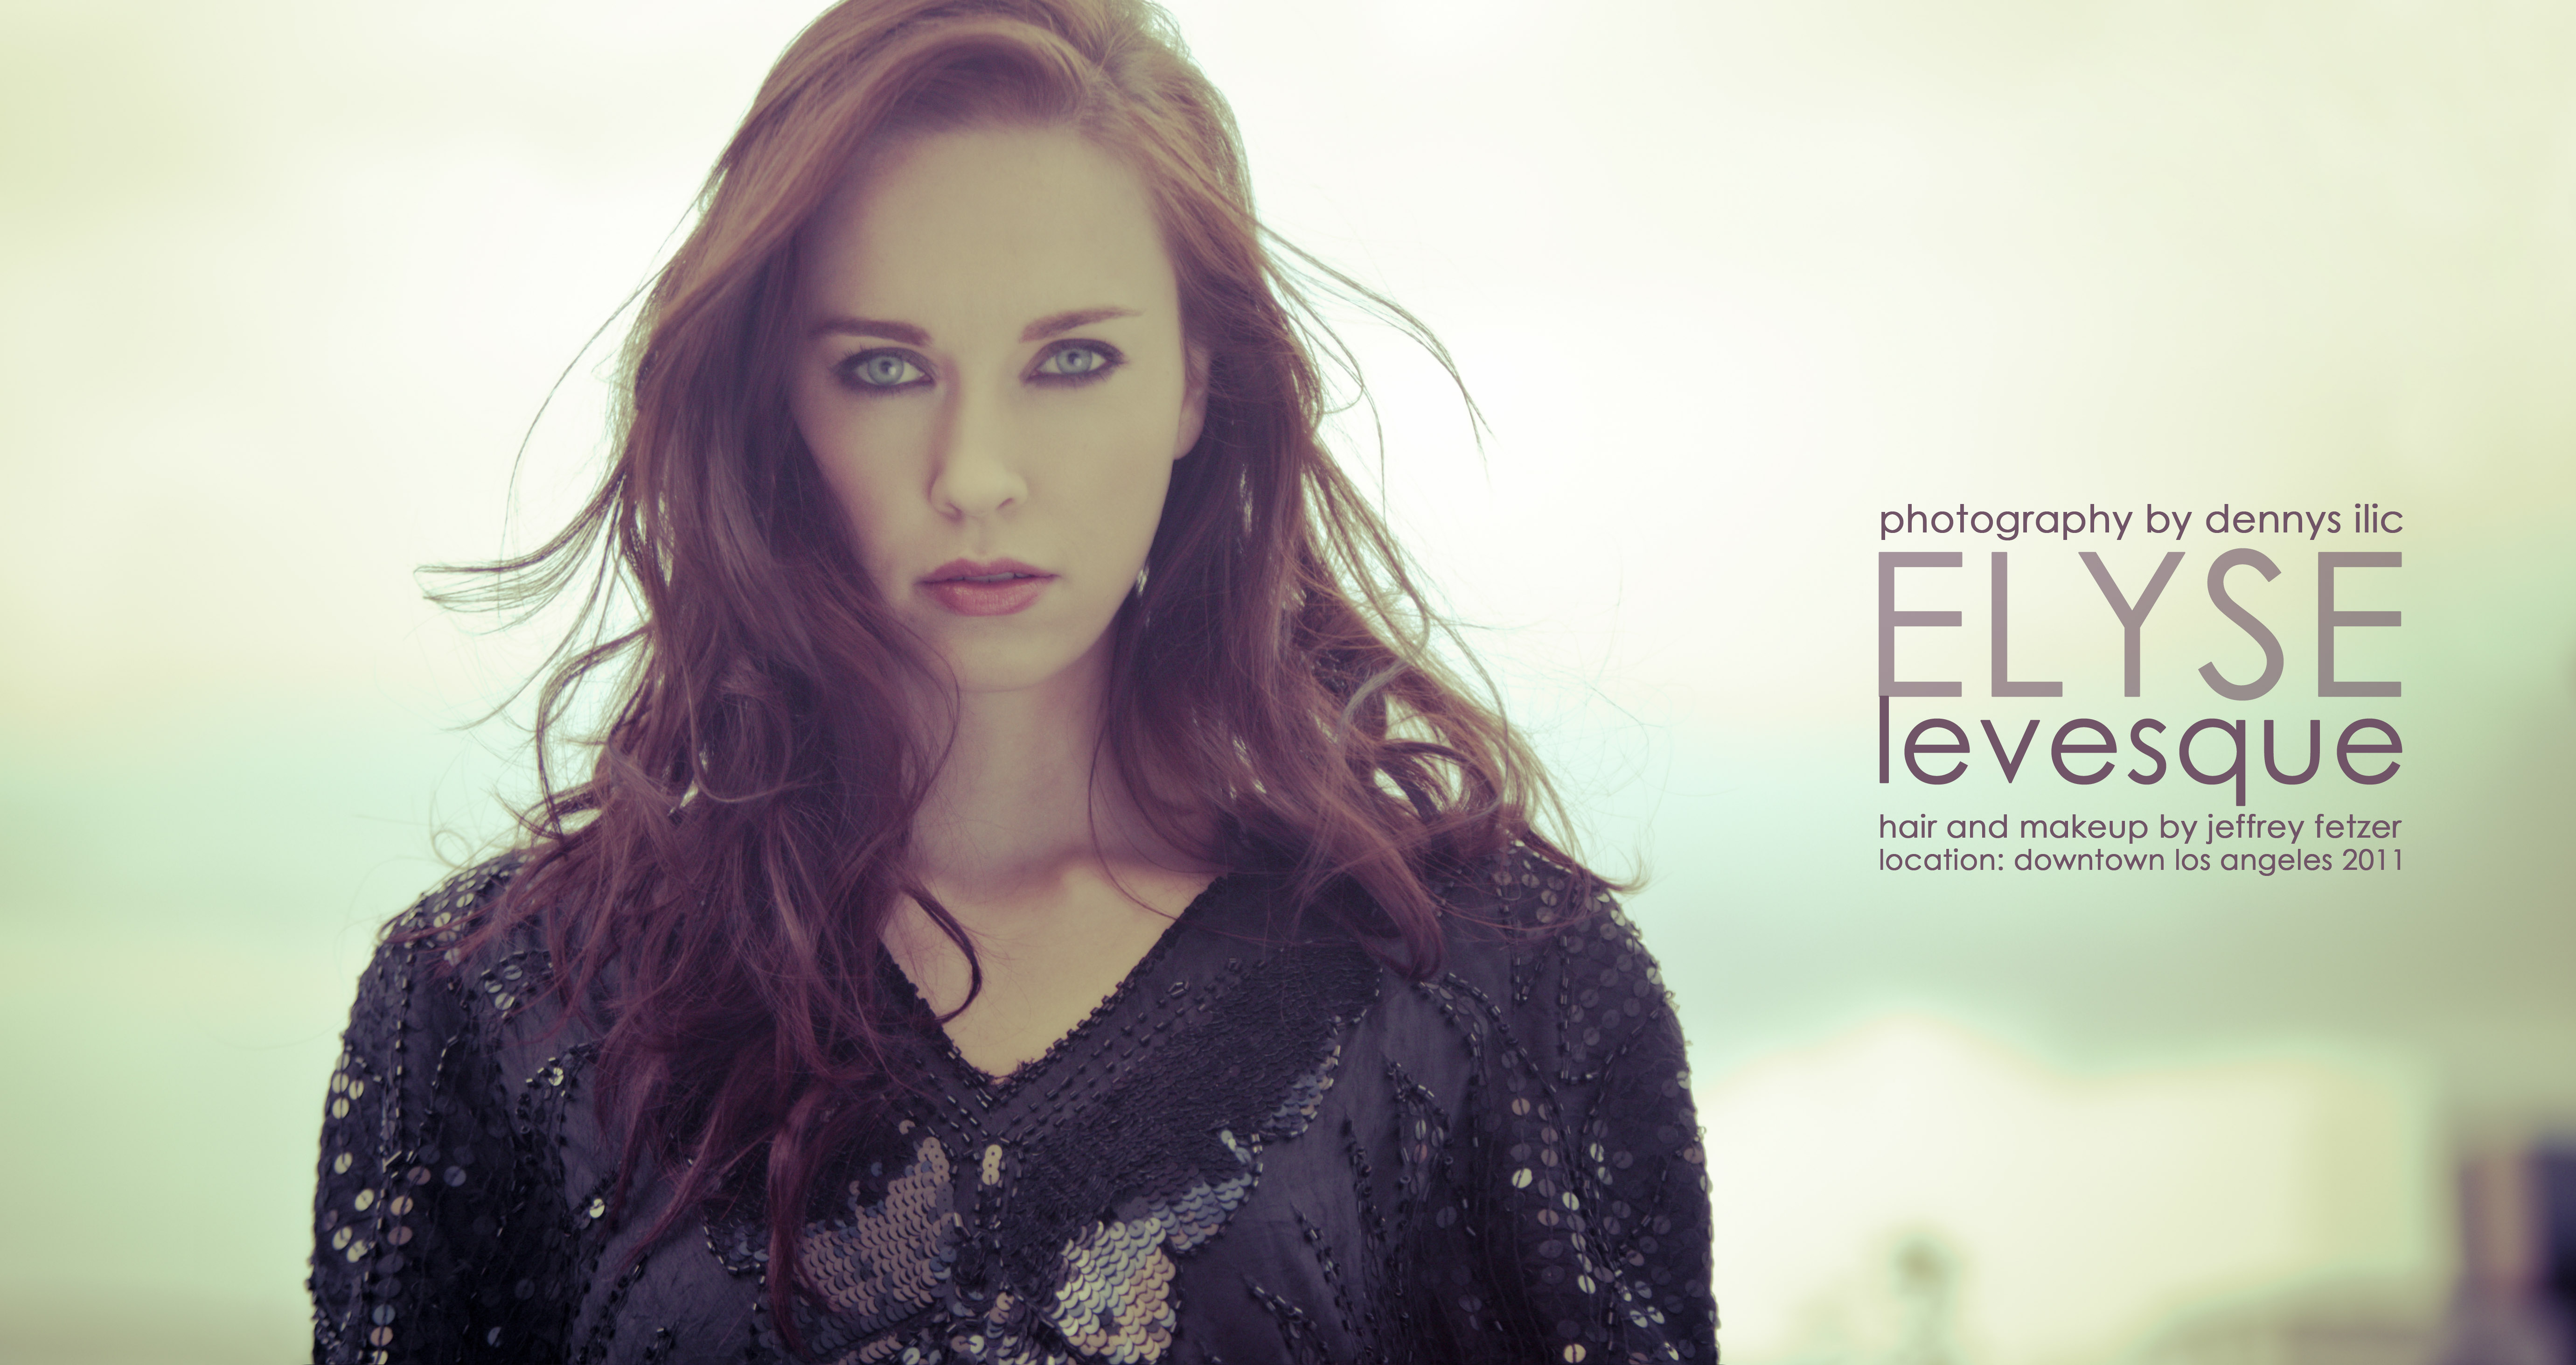 Actor Gina Holden by Dennys Ilic